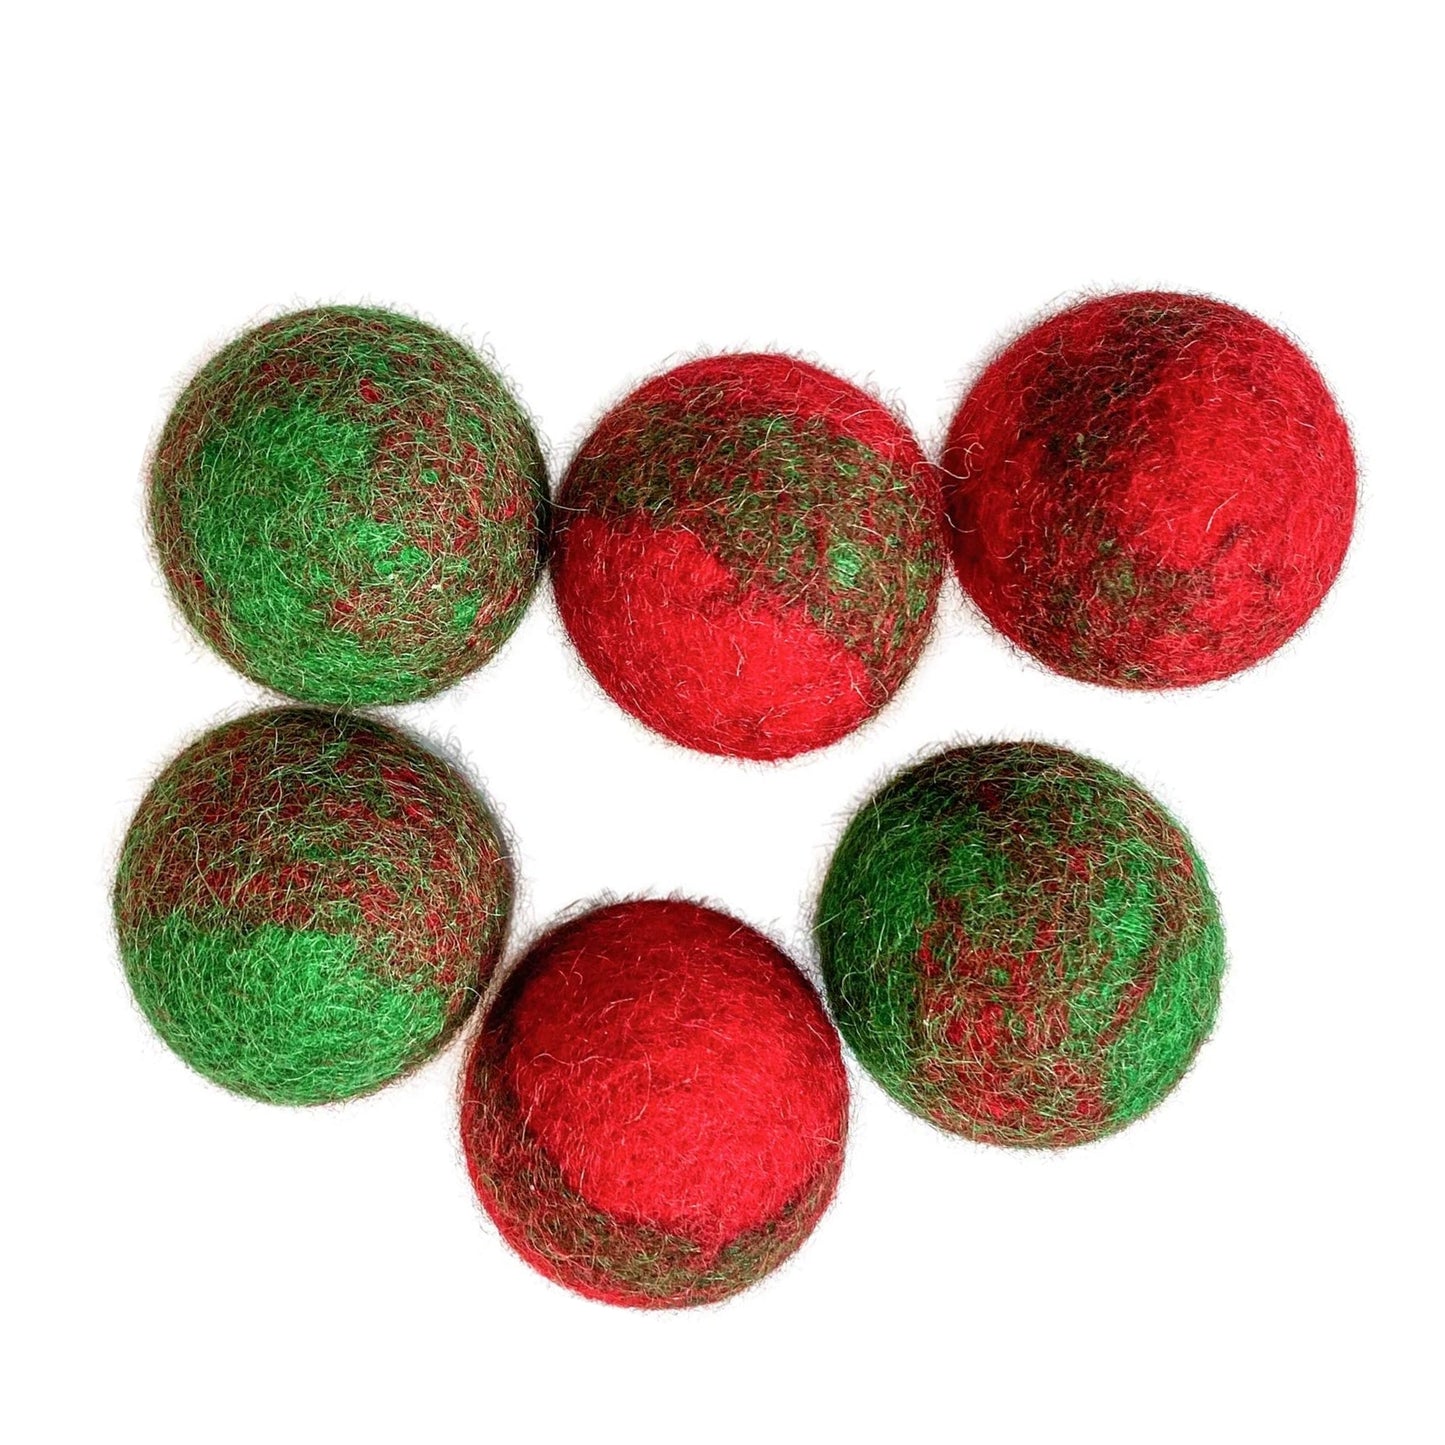 Midlee Wool Felt Multi Colored Balls Filled Candy Cane Cat Toys